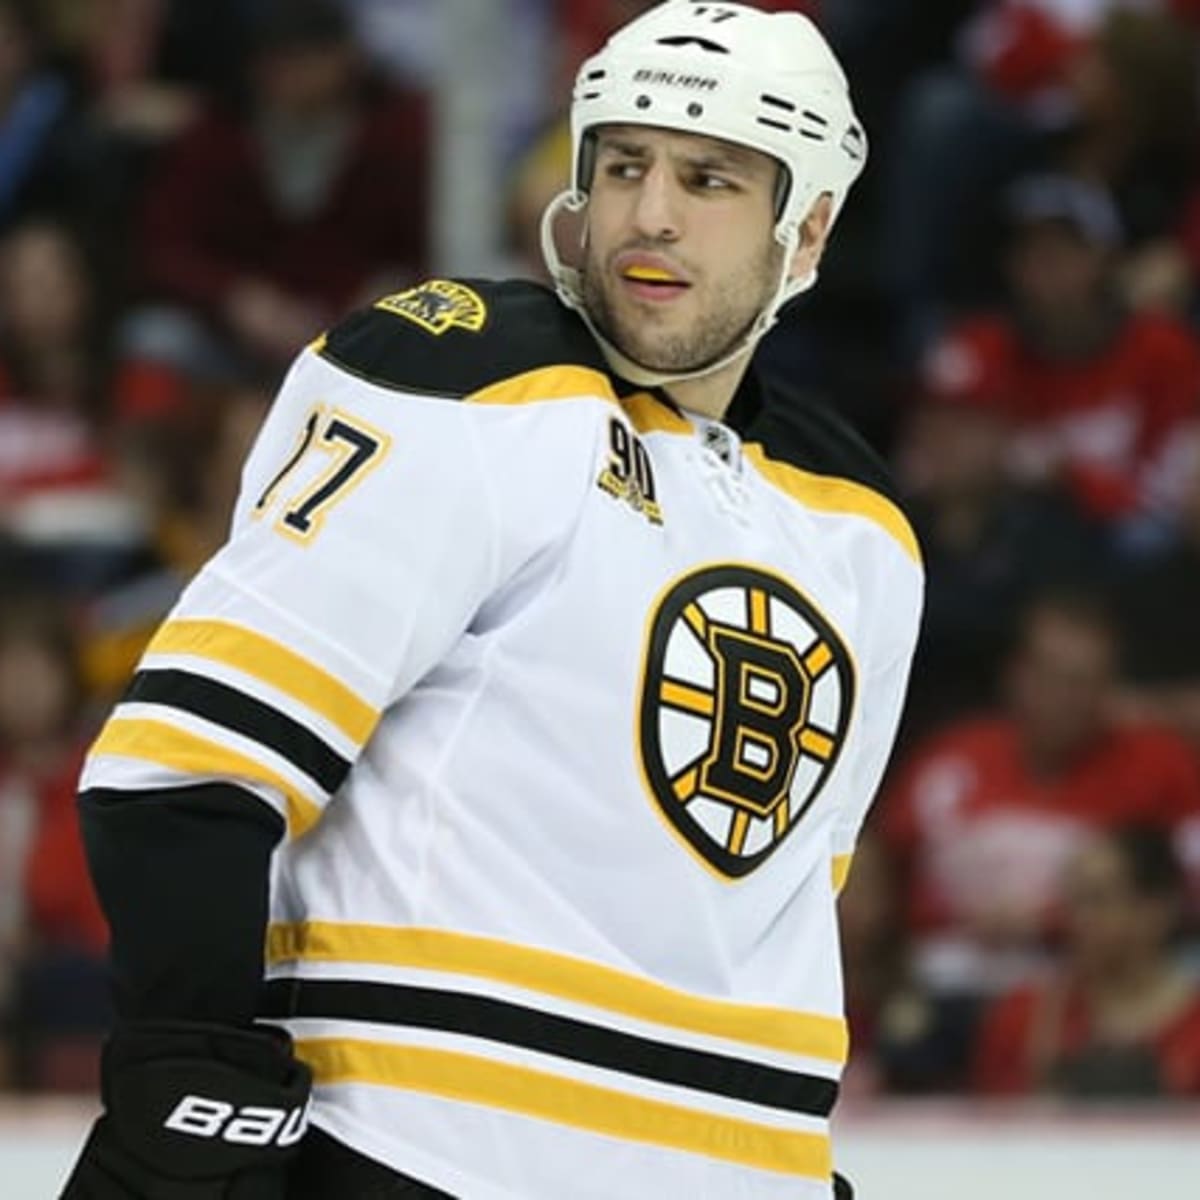 Milan Lucic hints where he wants to finish his career - HockeyFeed